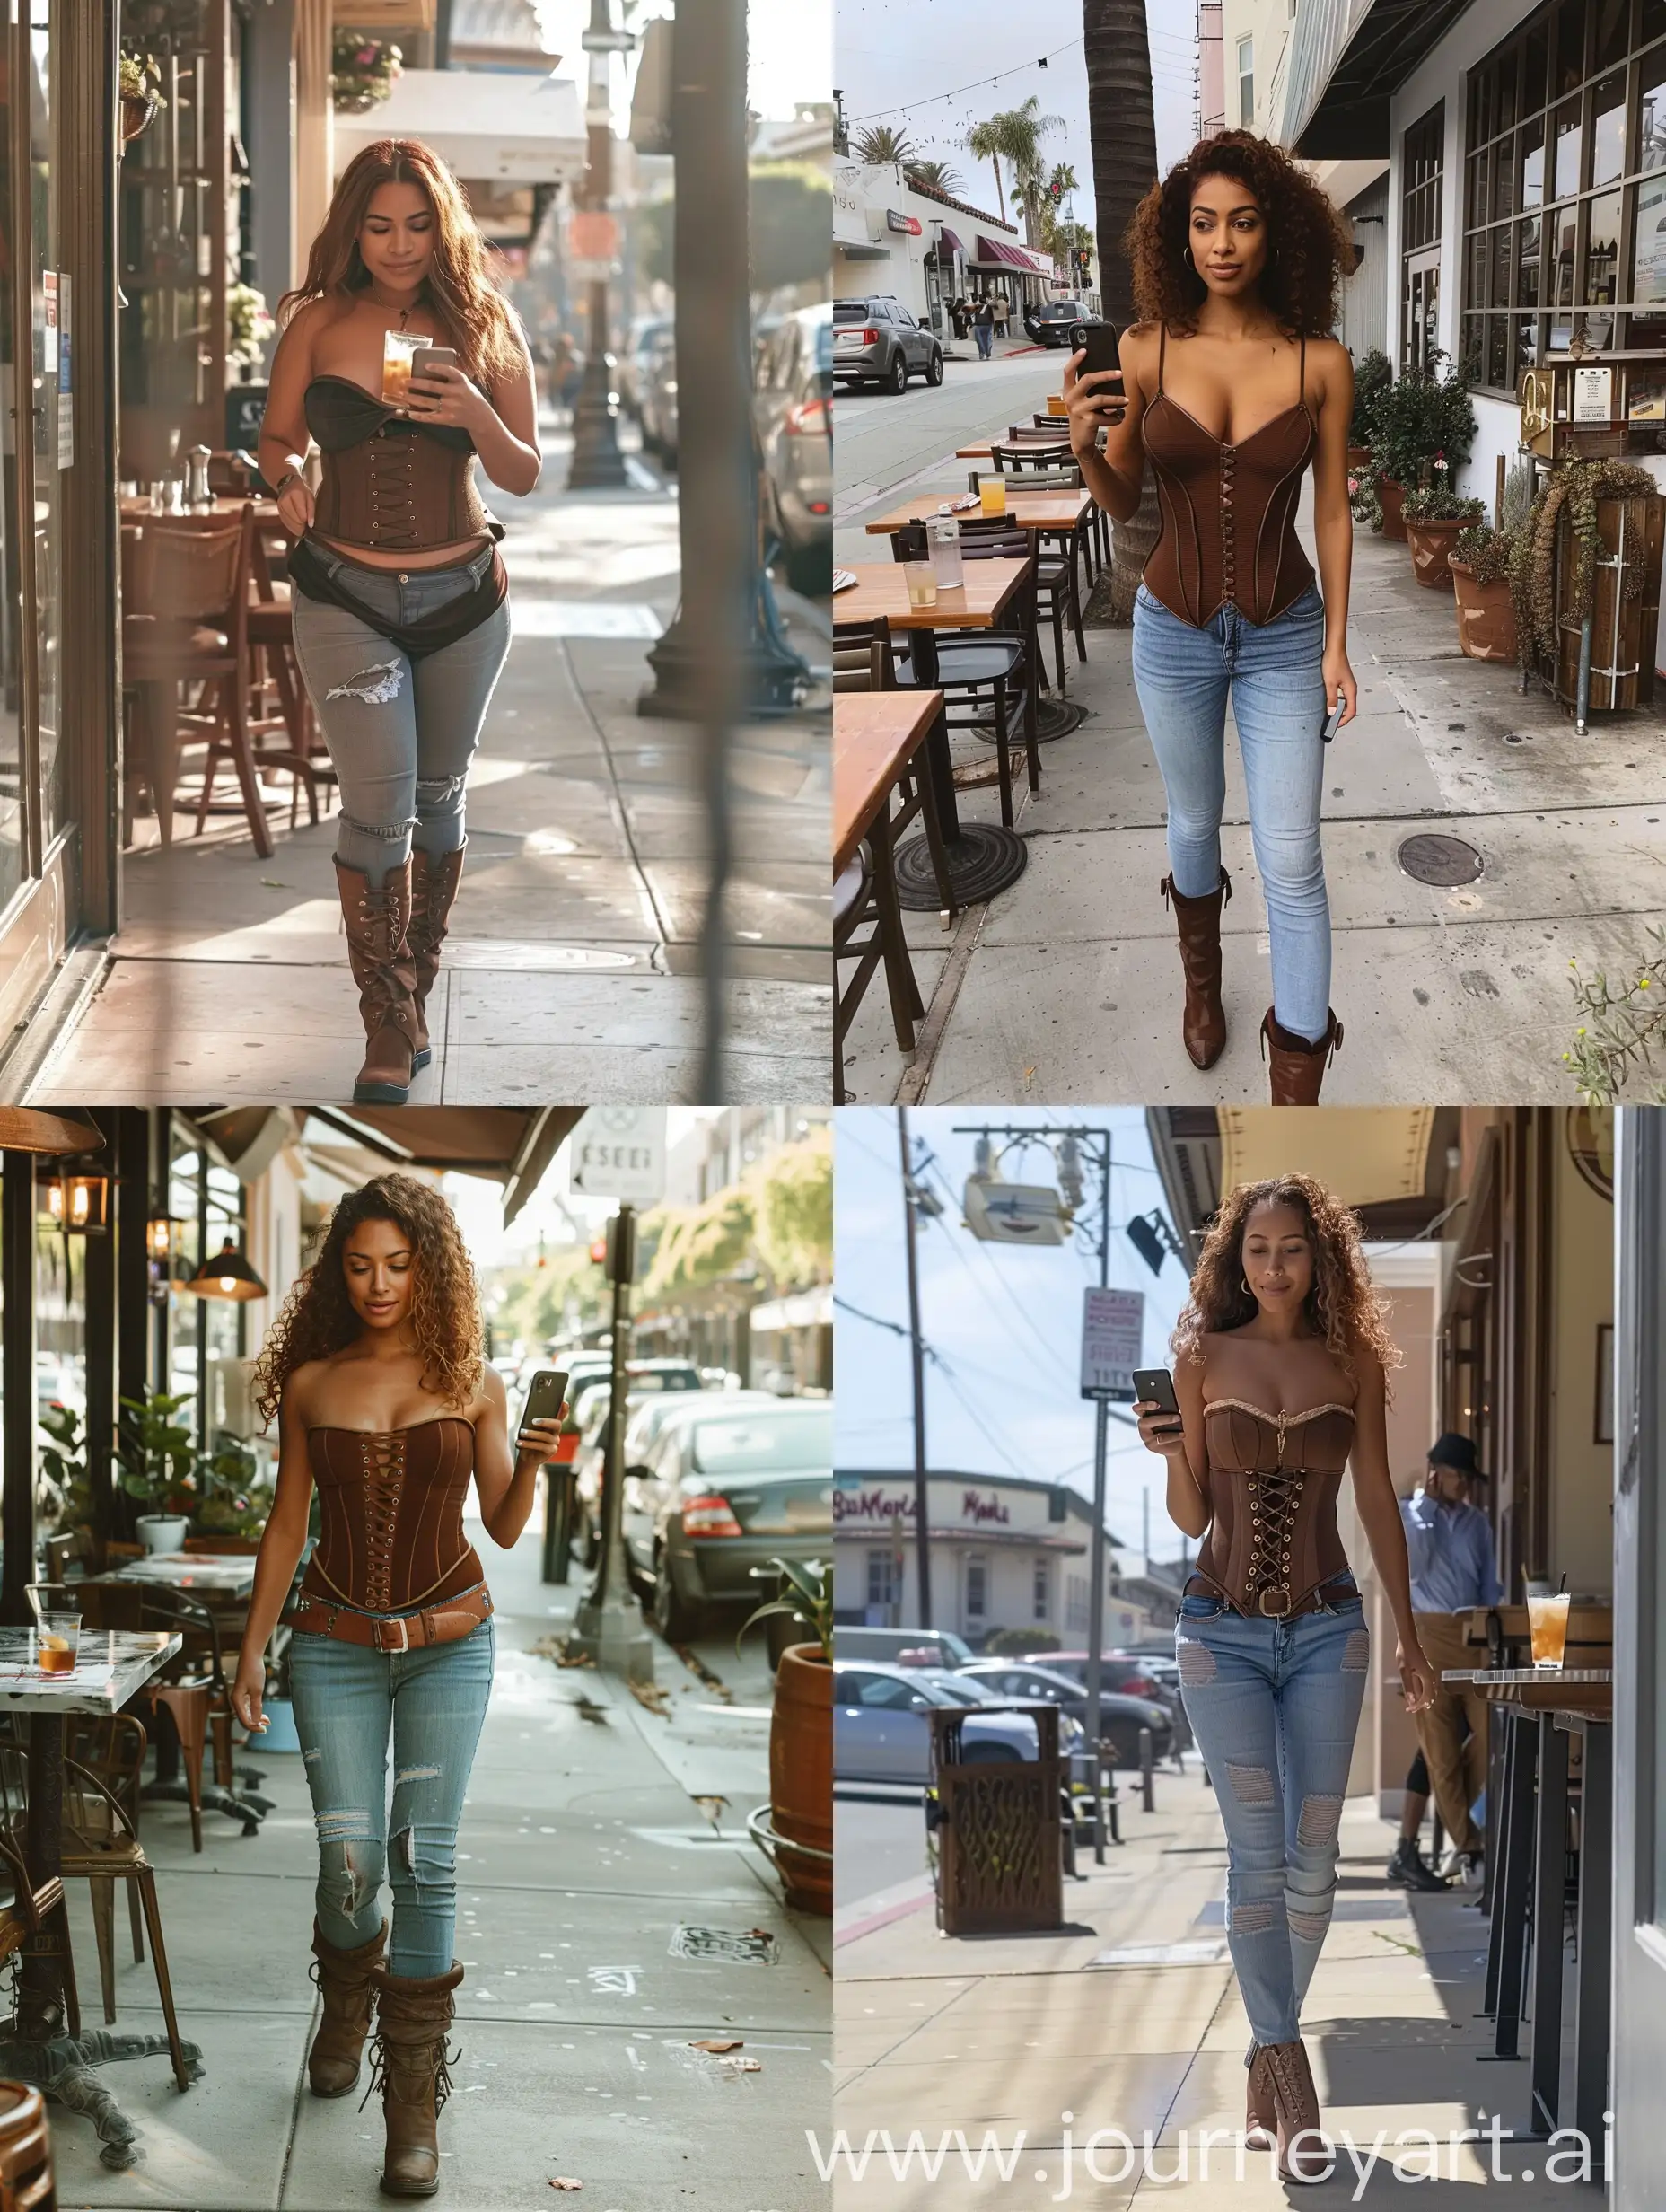 a woman walking down a sidewalk holding a cell phone, inspired by Briana Mora, instagram, renaissance, brown corset, wearing tight shirt, standing in a restaurant, fit curvy physique, jeans and boots, upper body face shot, drink, with brown skin, outfit photo, full - view